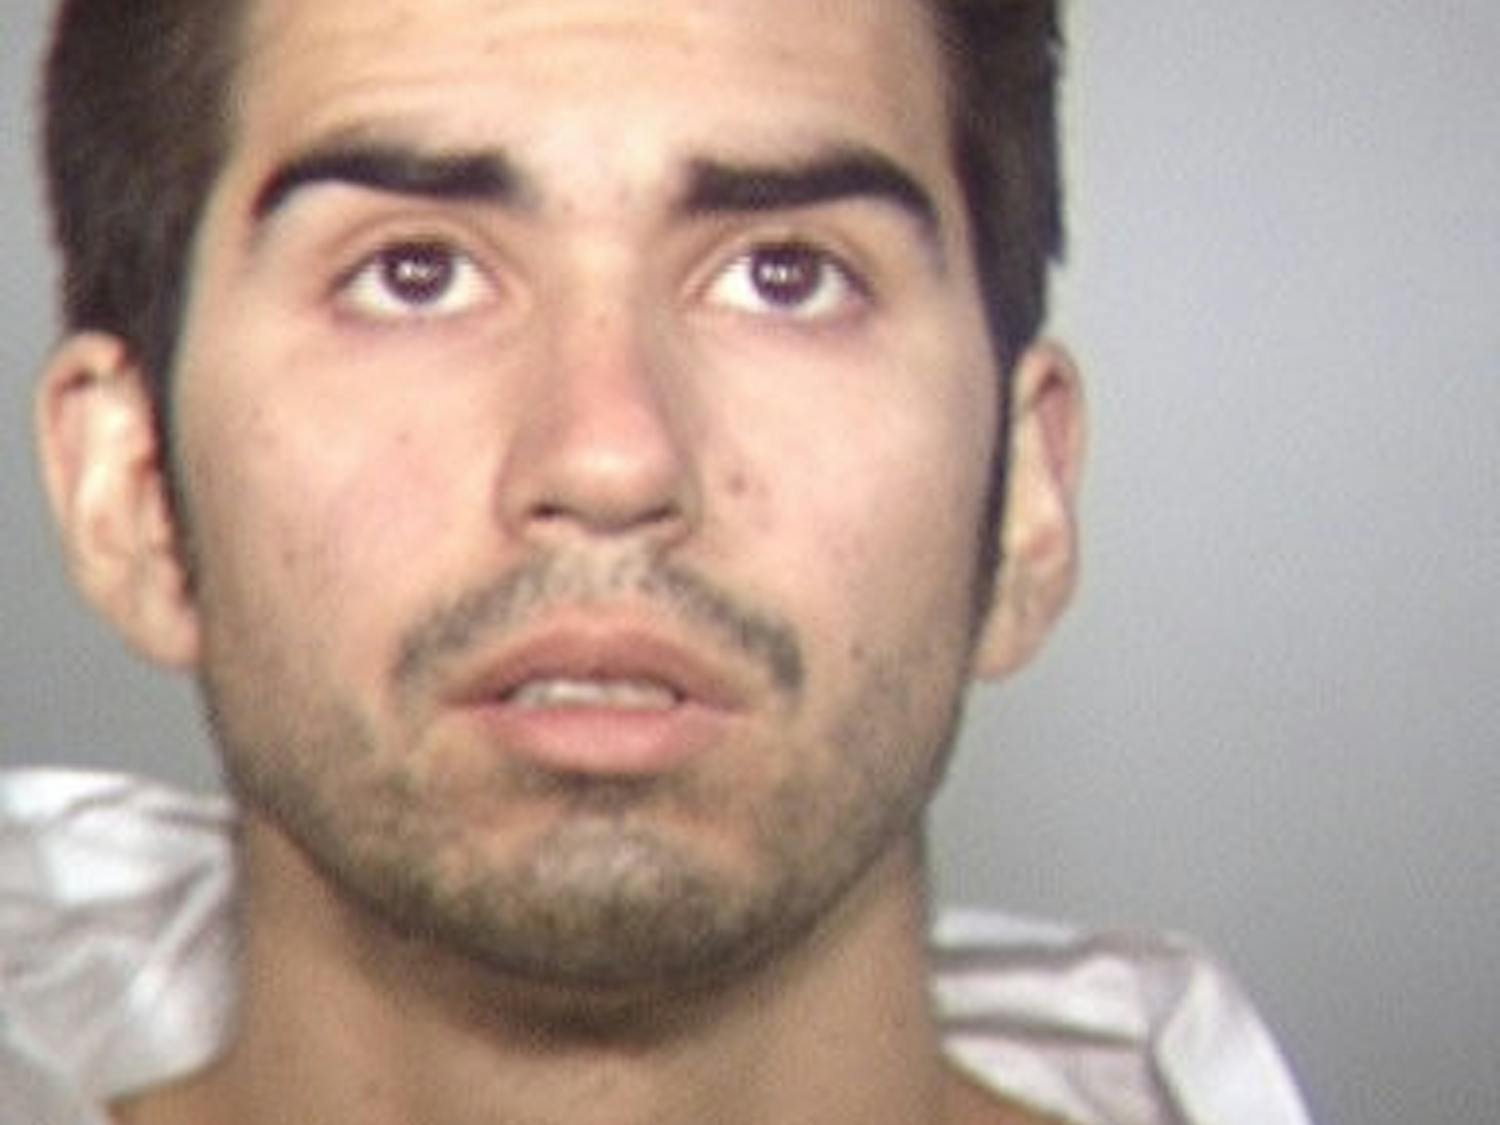 Luis Gerardo Soltero, 23, was sentenced to 30 years in prison on Friday after he was found guilty of killing an ASU student, 19-year-old Rebecca Kasper. (Photo courtesy of Tempe Police Department)